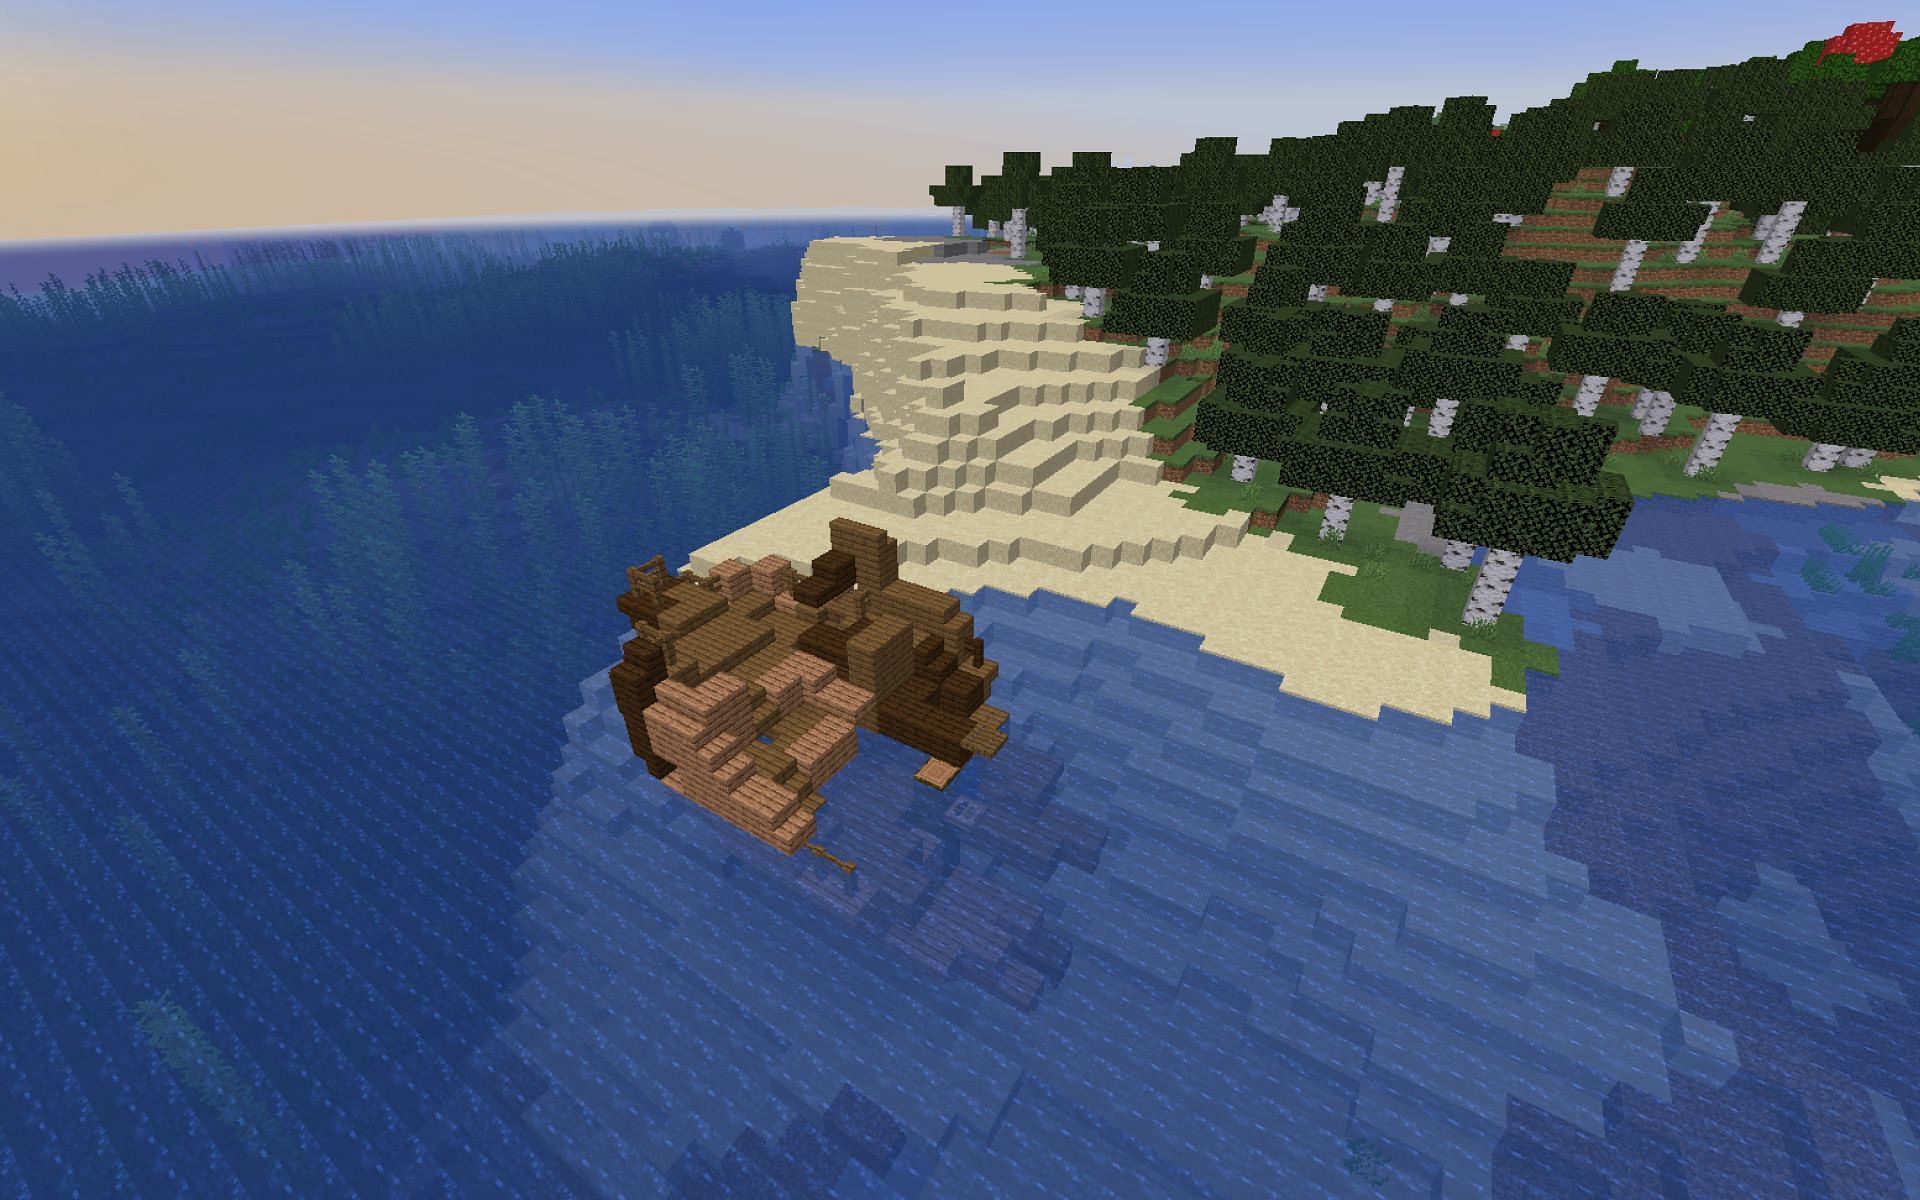 Emeralds often generate in shipwrecks and are buried in treasure chests. (Image via Minecraft)